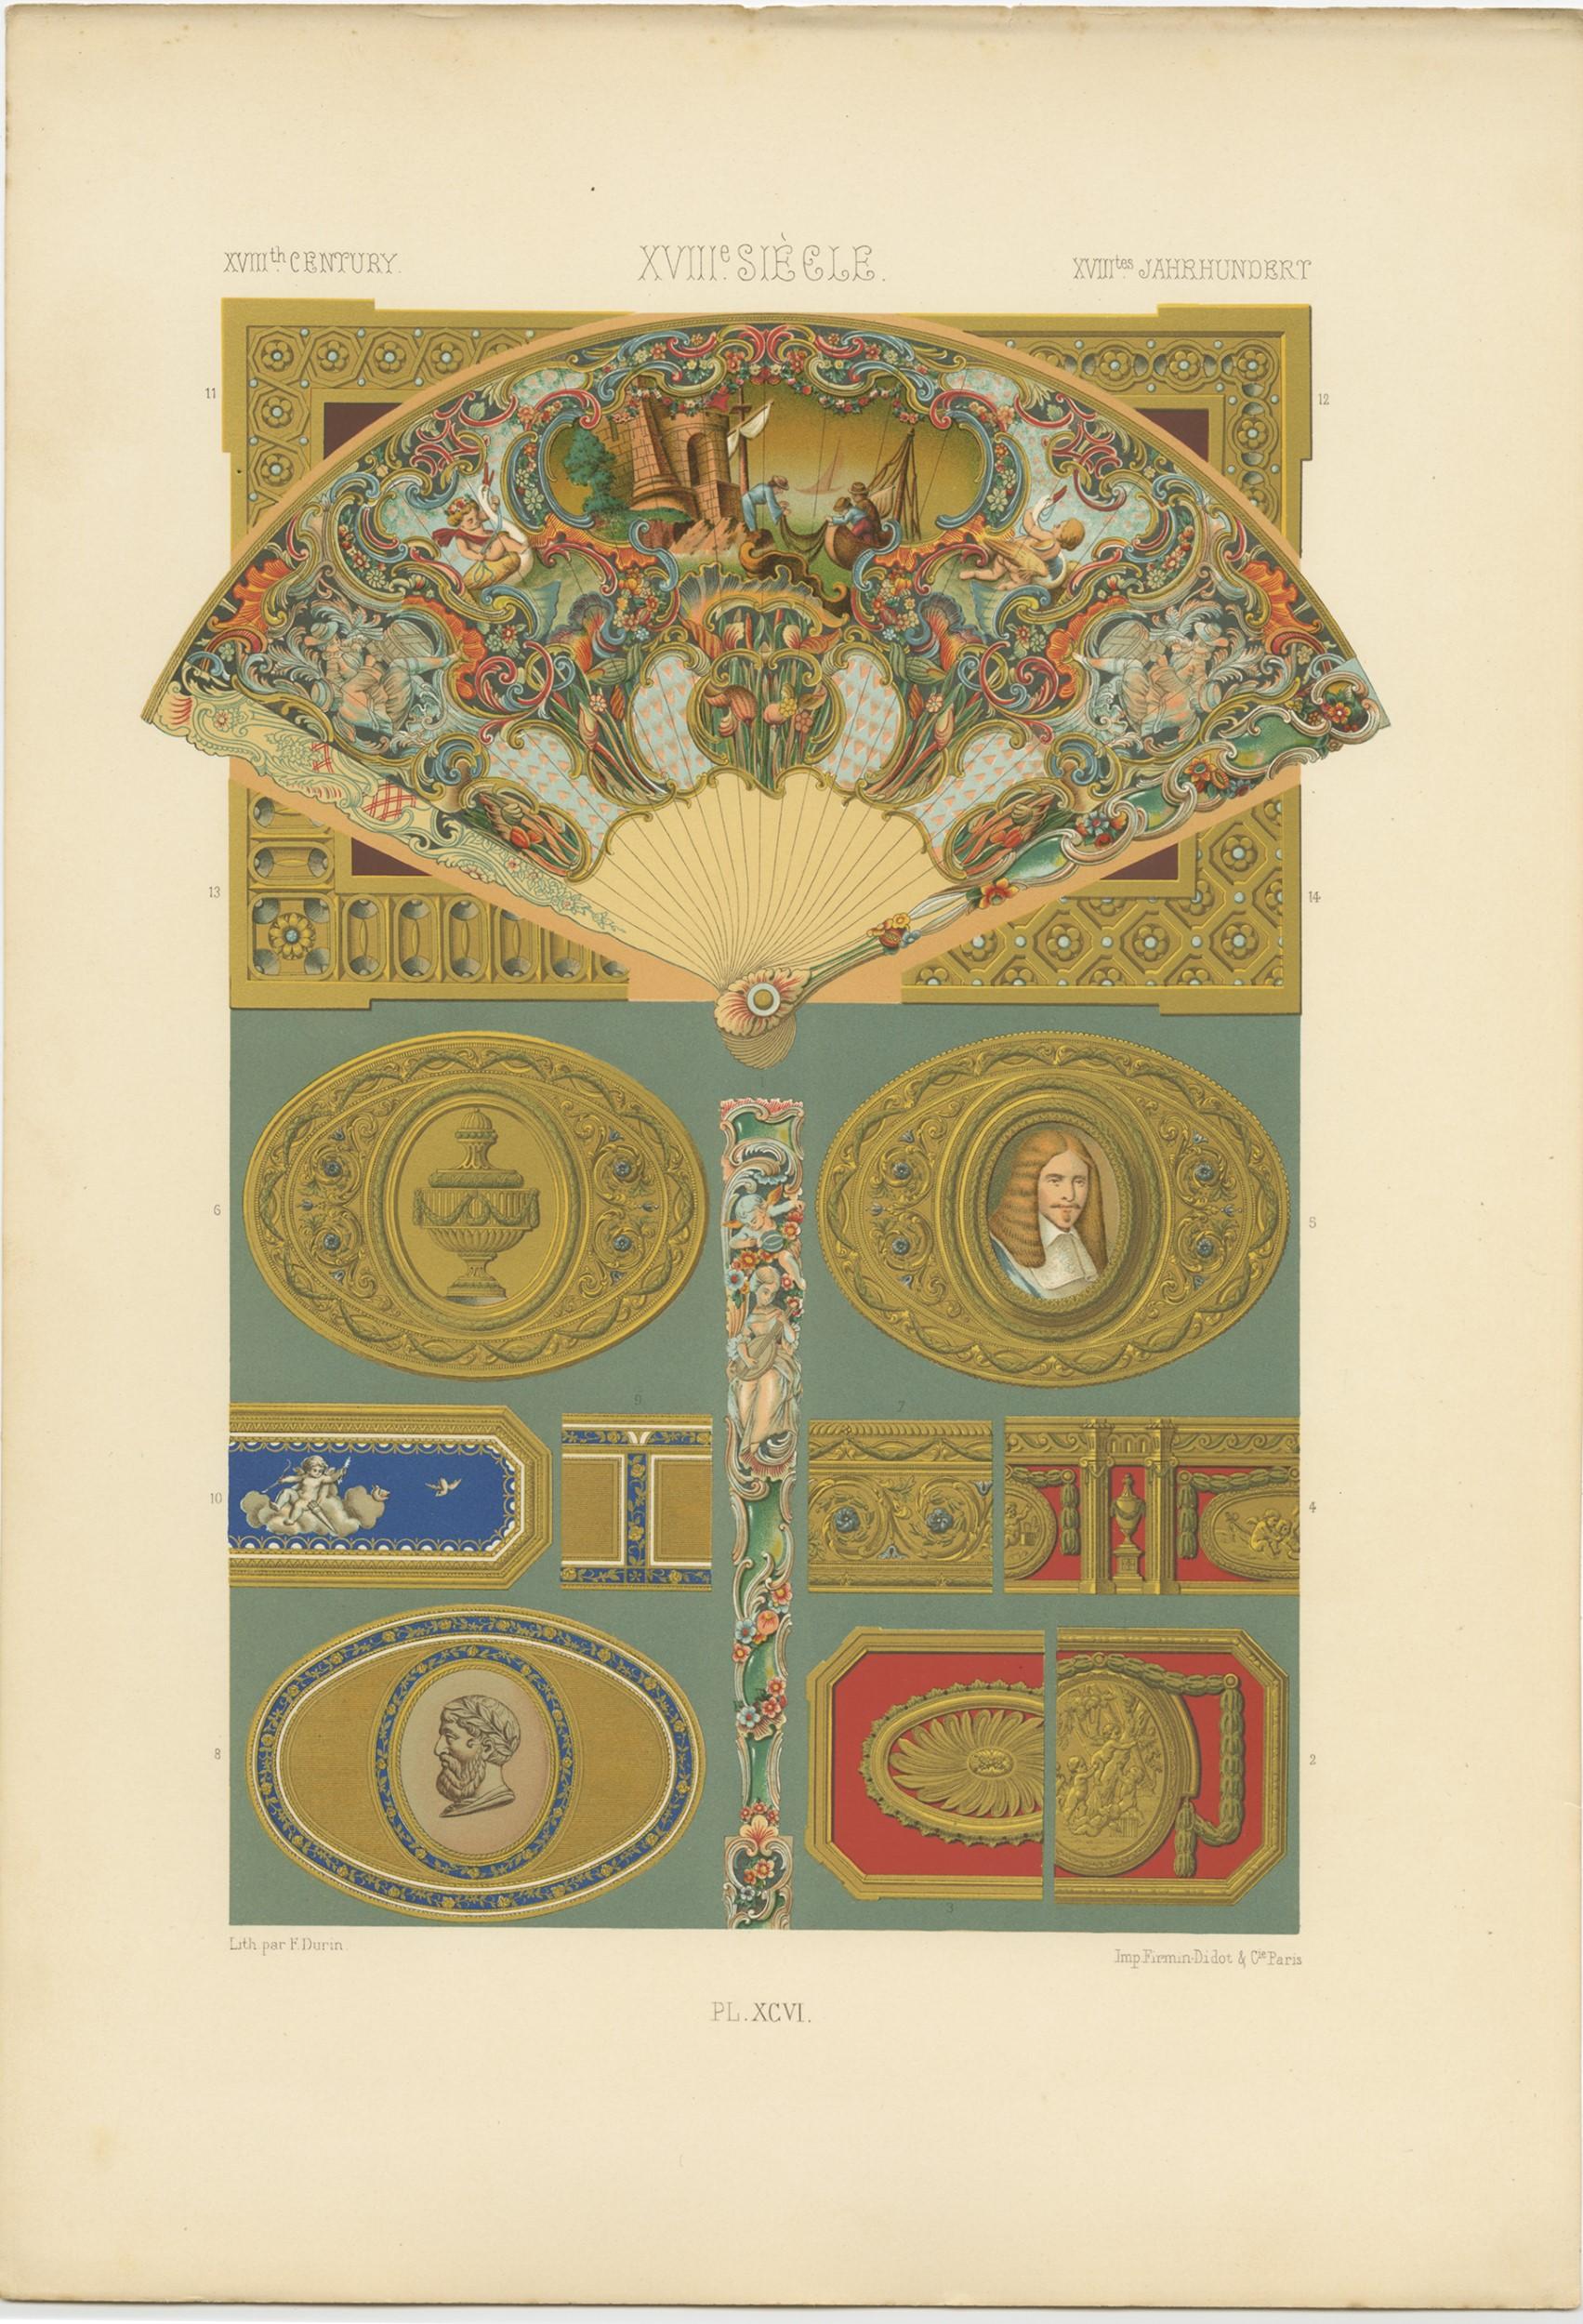 Antique print titled 'XVIIIth Century - XVIIIe Siecle - XVIIItes et Jahrhundert'. Chromolithograph of XVIIIth Century ornaments and decorative arts. This print originates from 'l'Ornement Polychrome' by Auguste Racinet. Published circa 1890.